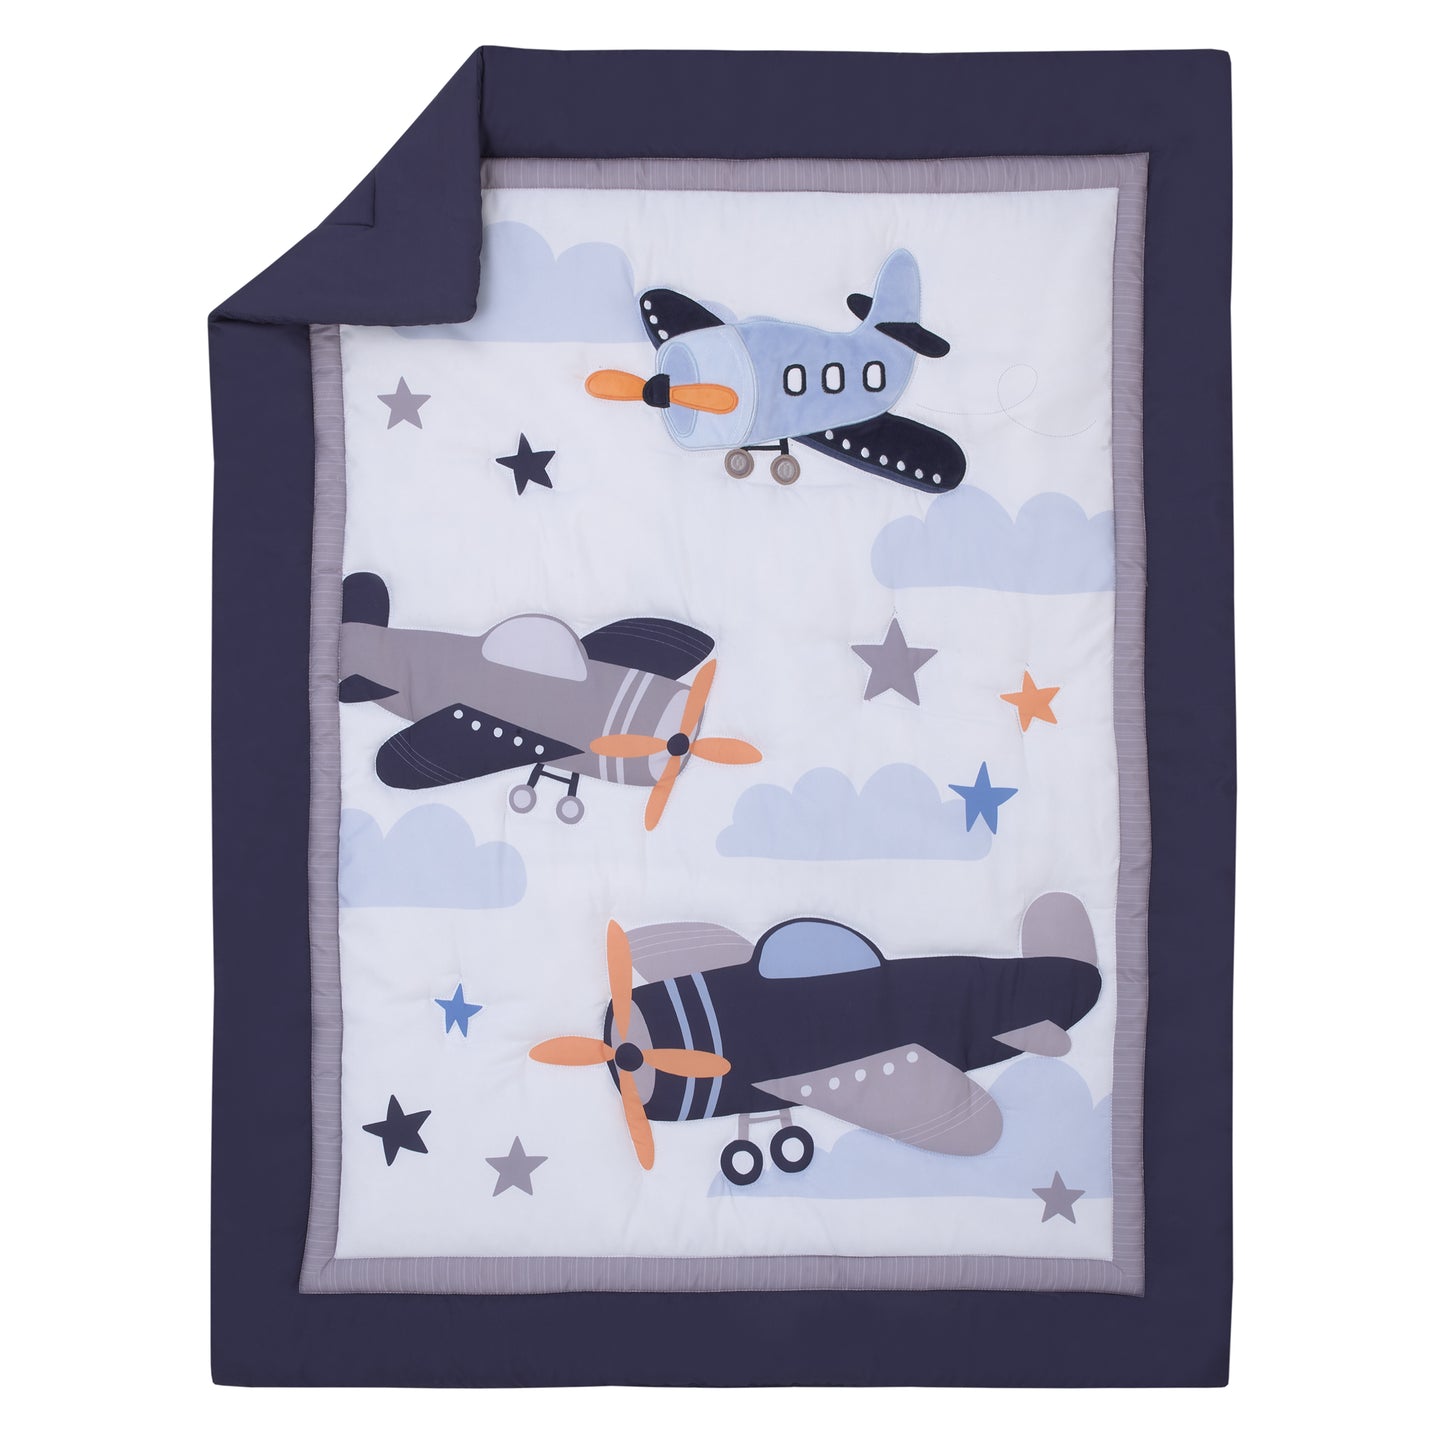 Little Love by NoJo Soar High Little One Navy, Light Blue, Orange, and White Airplanes, Clouds, and Stars 3 Piece Nursery Crib Bedding Set - Comforter, Fitted Crib Sheet and Crib Skirt